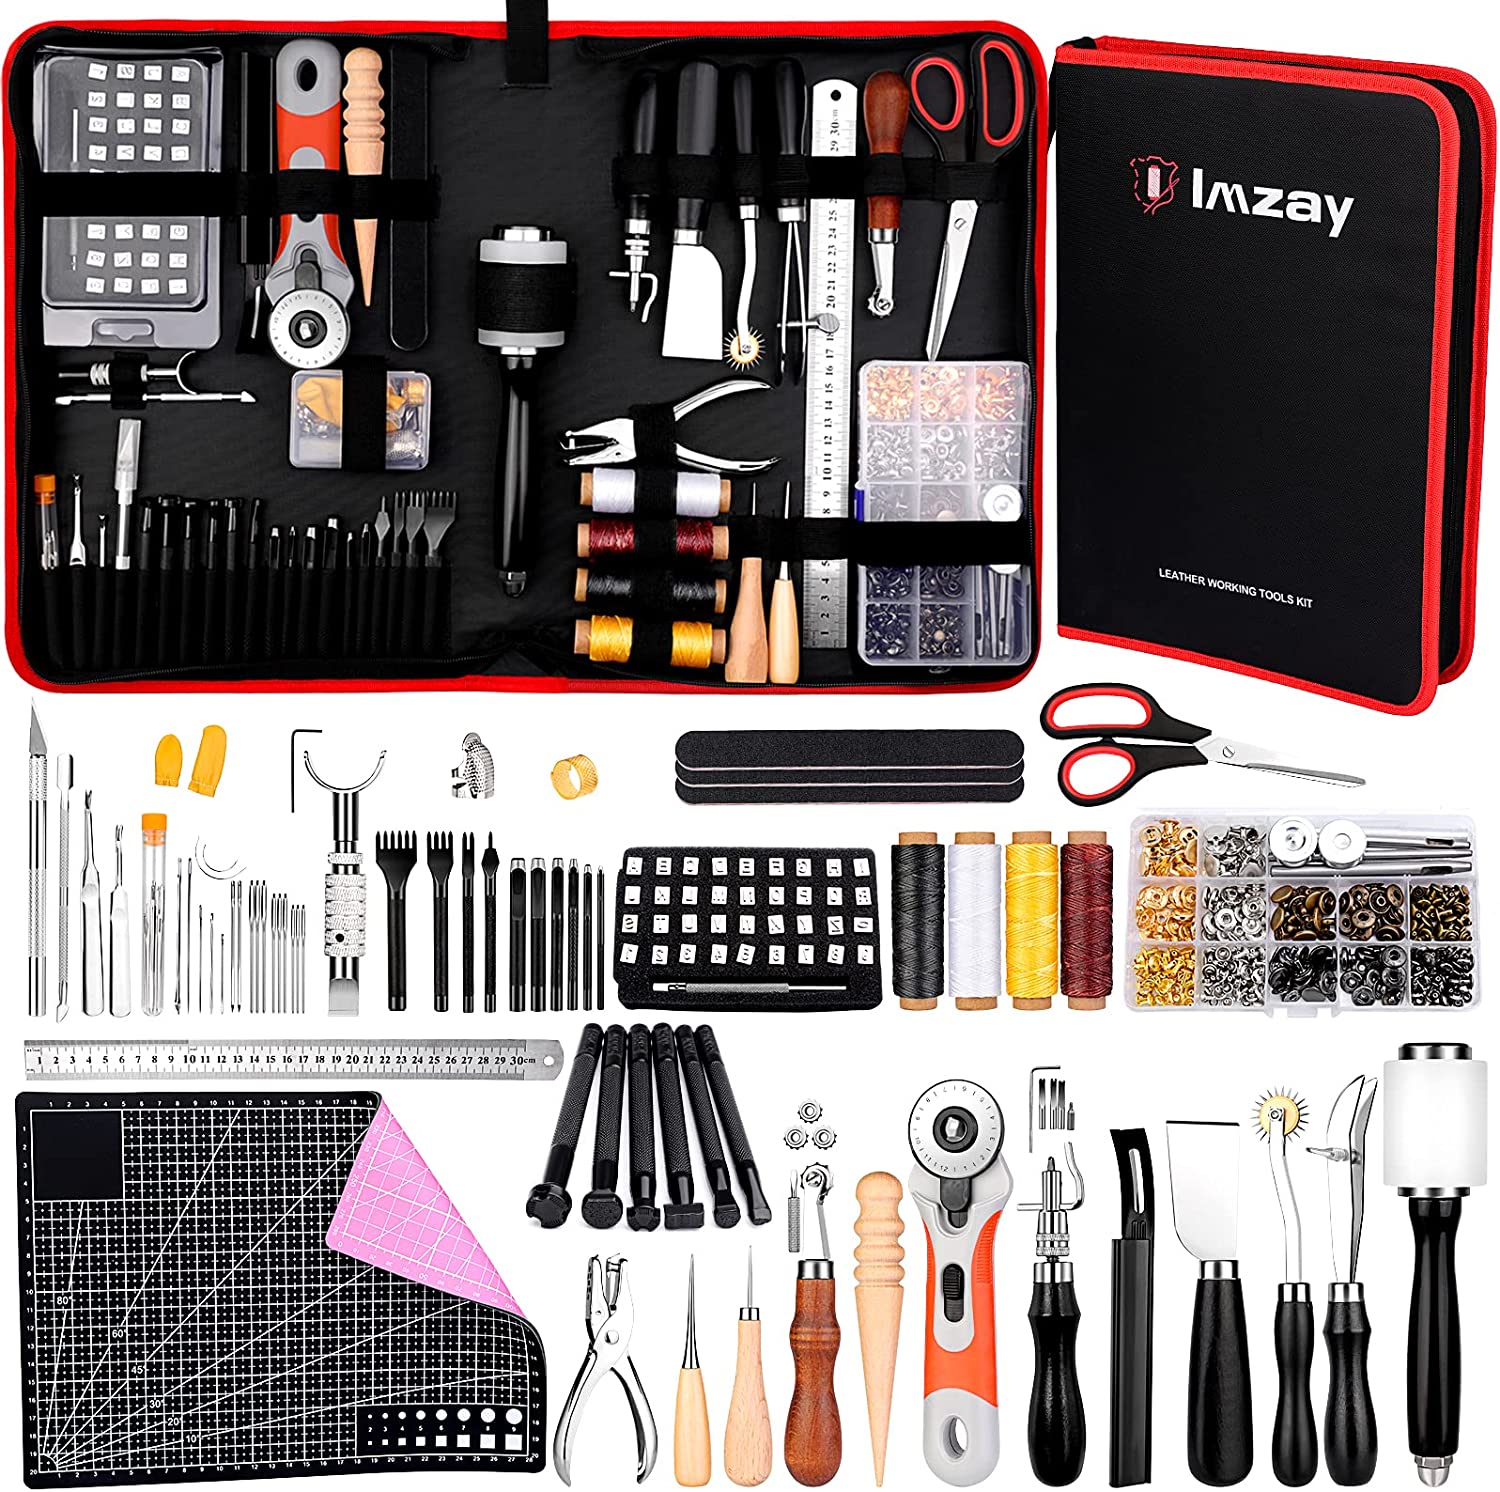 IMZAY 304Pcs Leather Tooling Working Kit, Compact Beginner Leather Tools  and Supplies with Leather Stitching Sewing Carving Cutting Crafting Tools  for Leather Sheath Wallet Belt Boot Seat Sewing